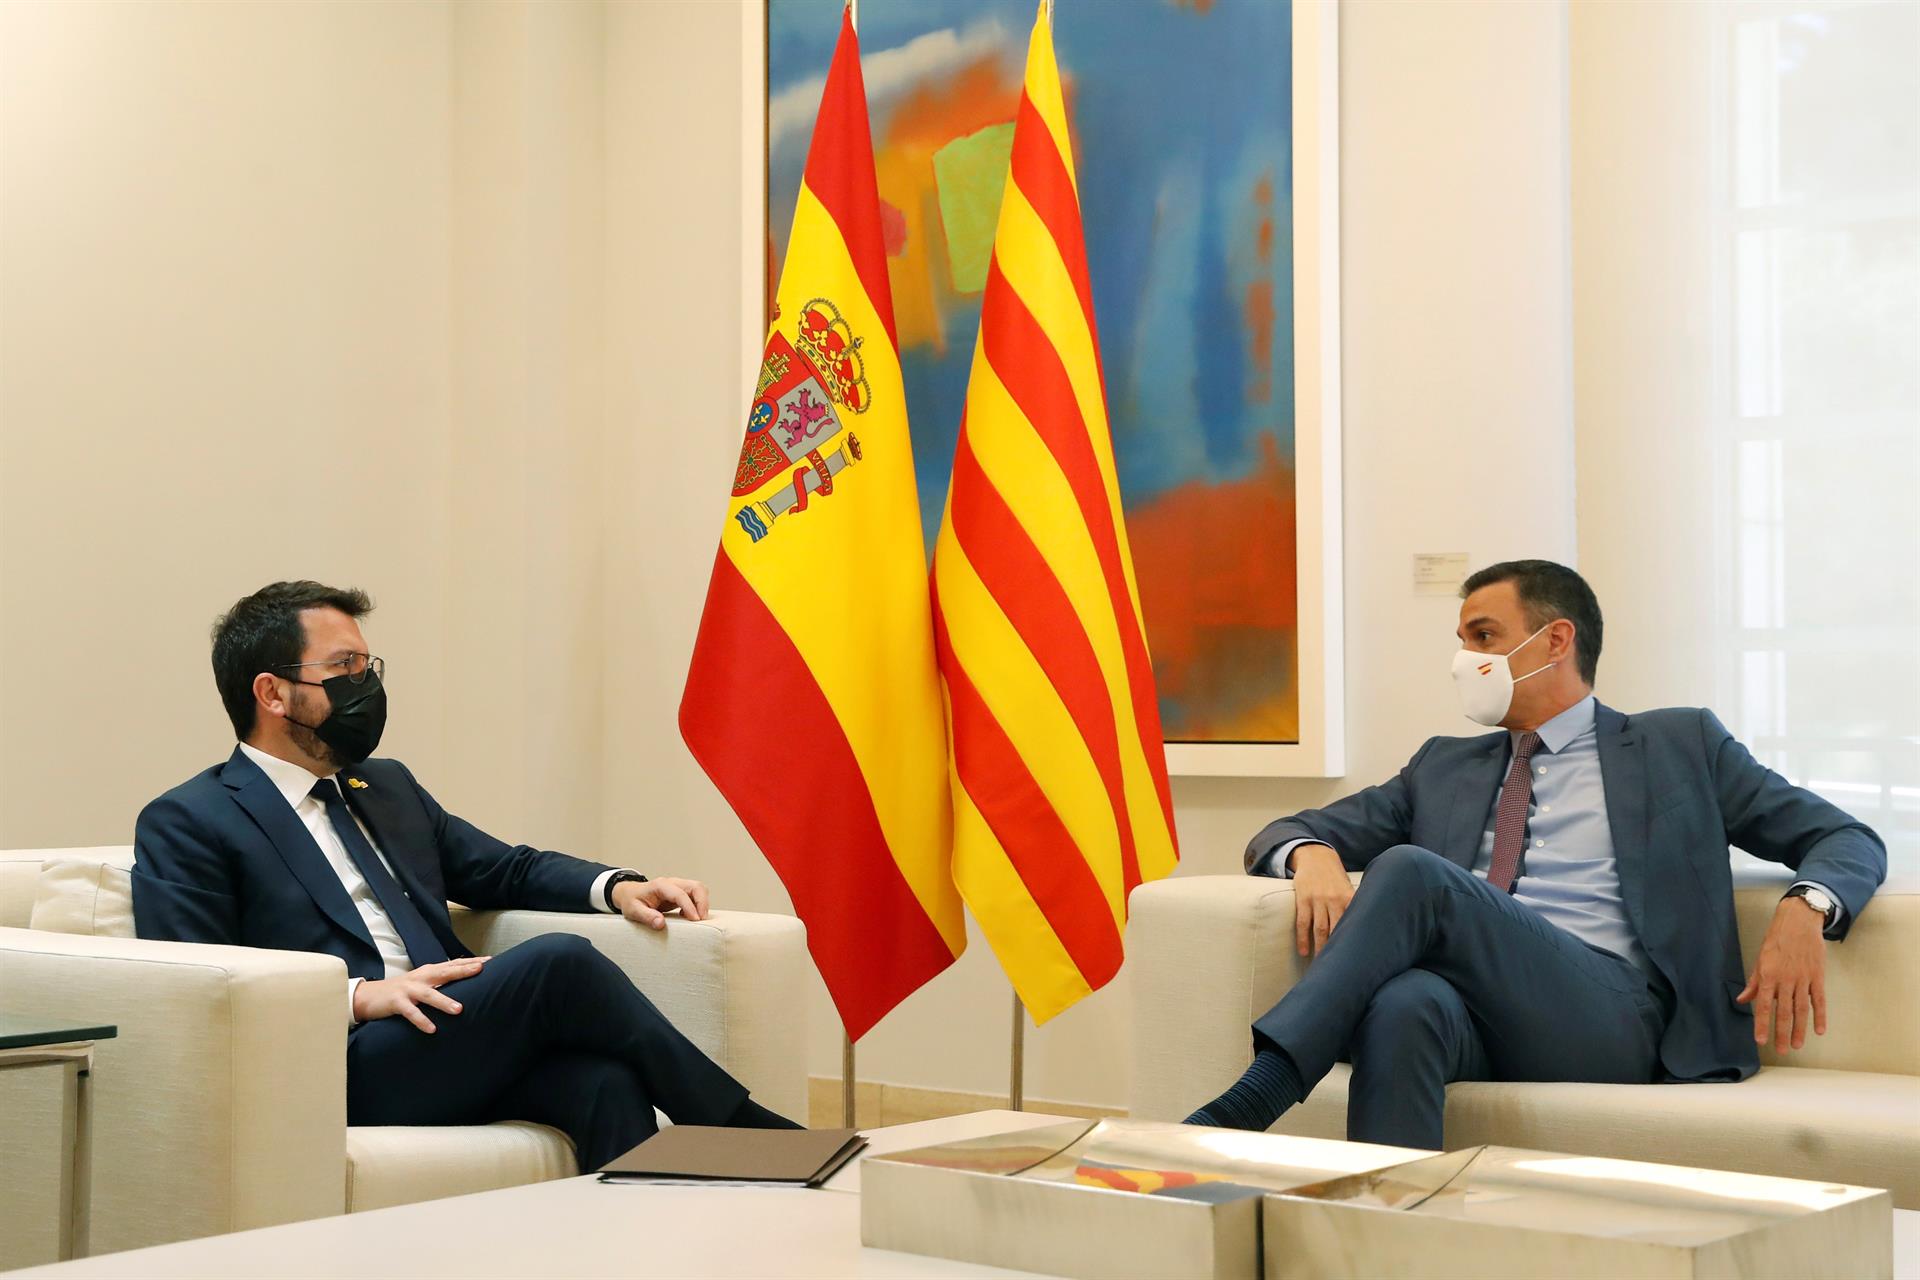 Aragonès and Sánchez agree to convene Spain-Catalonia dialogue table in September